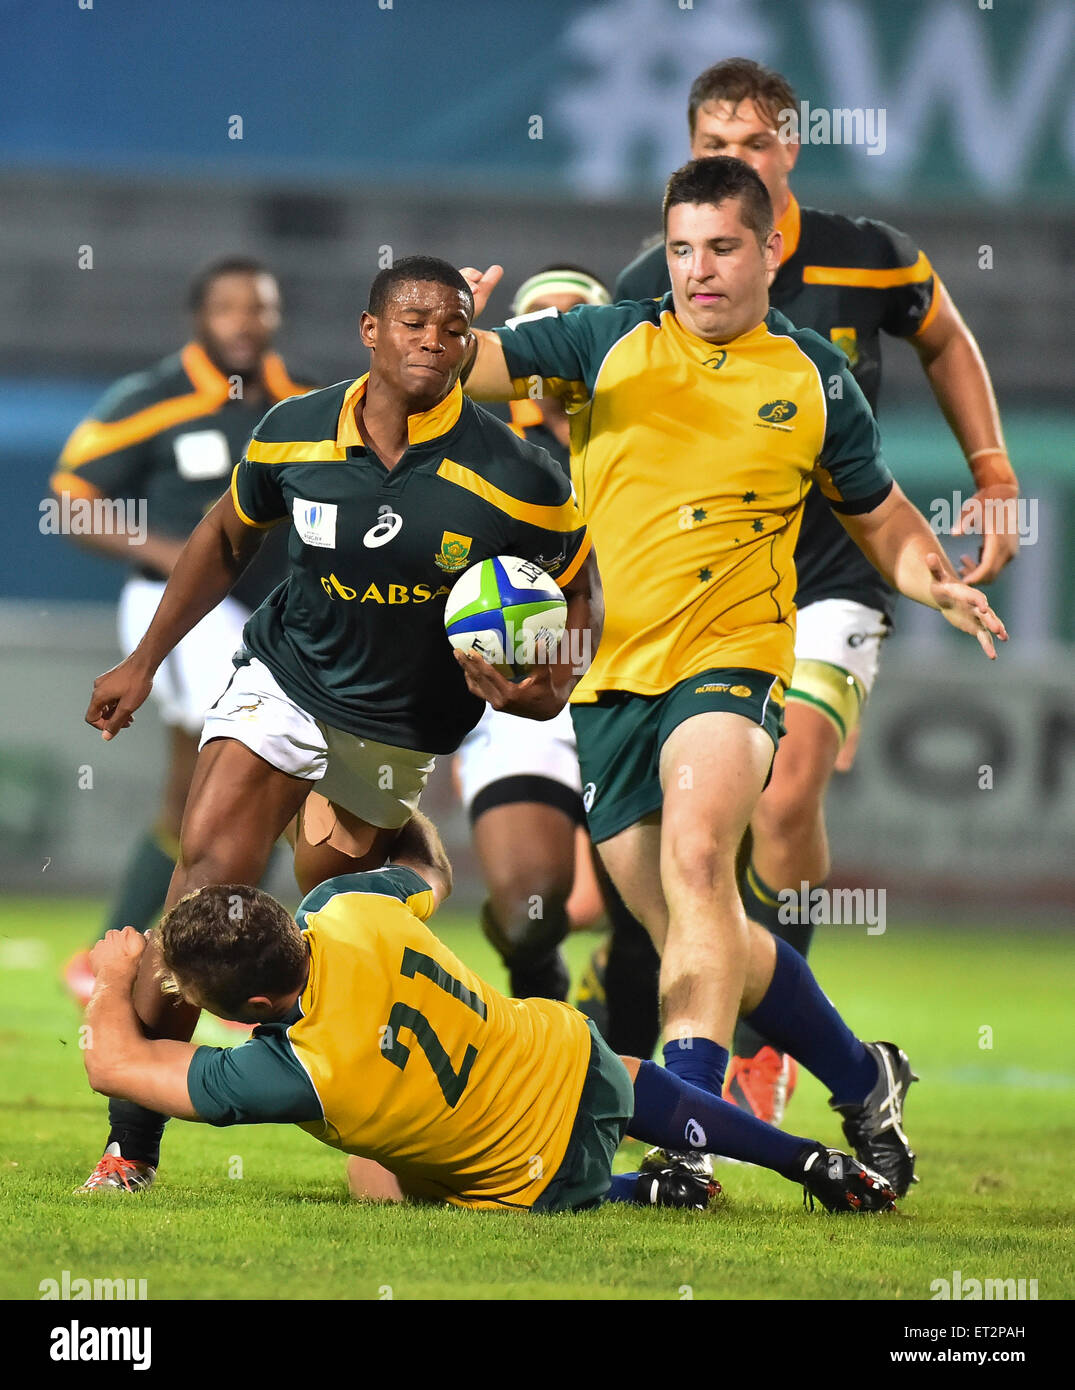 South Africa versus Australia at the World Rugby Under 20 Championship in  2015 Stock Photo - Alamy